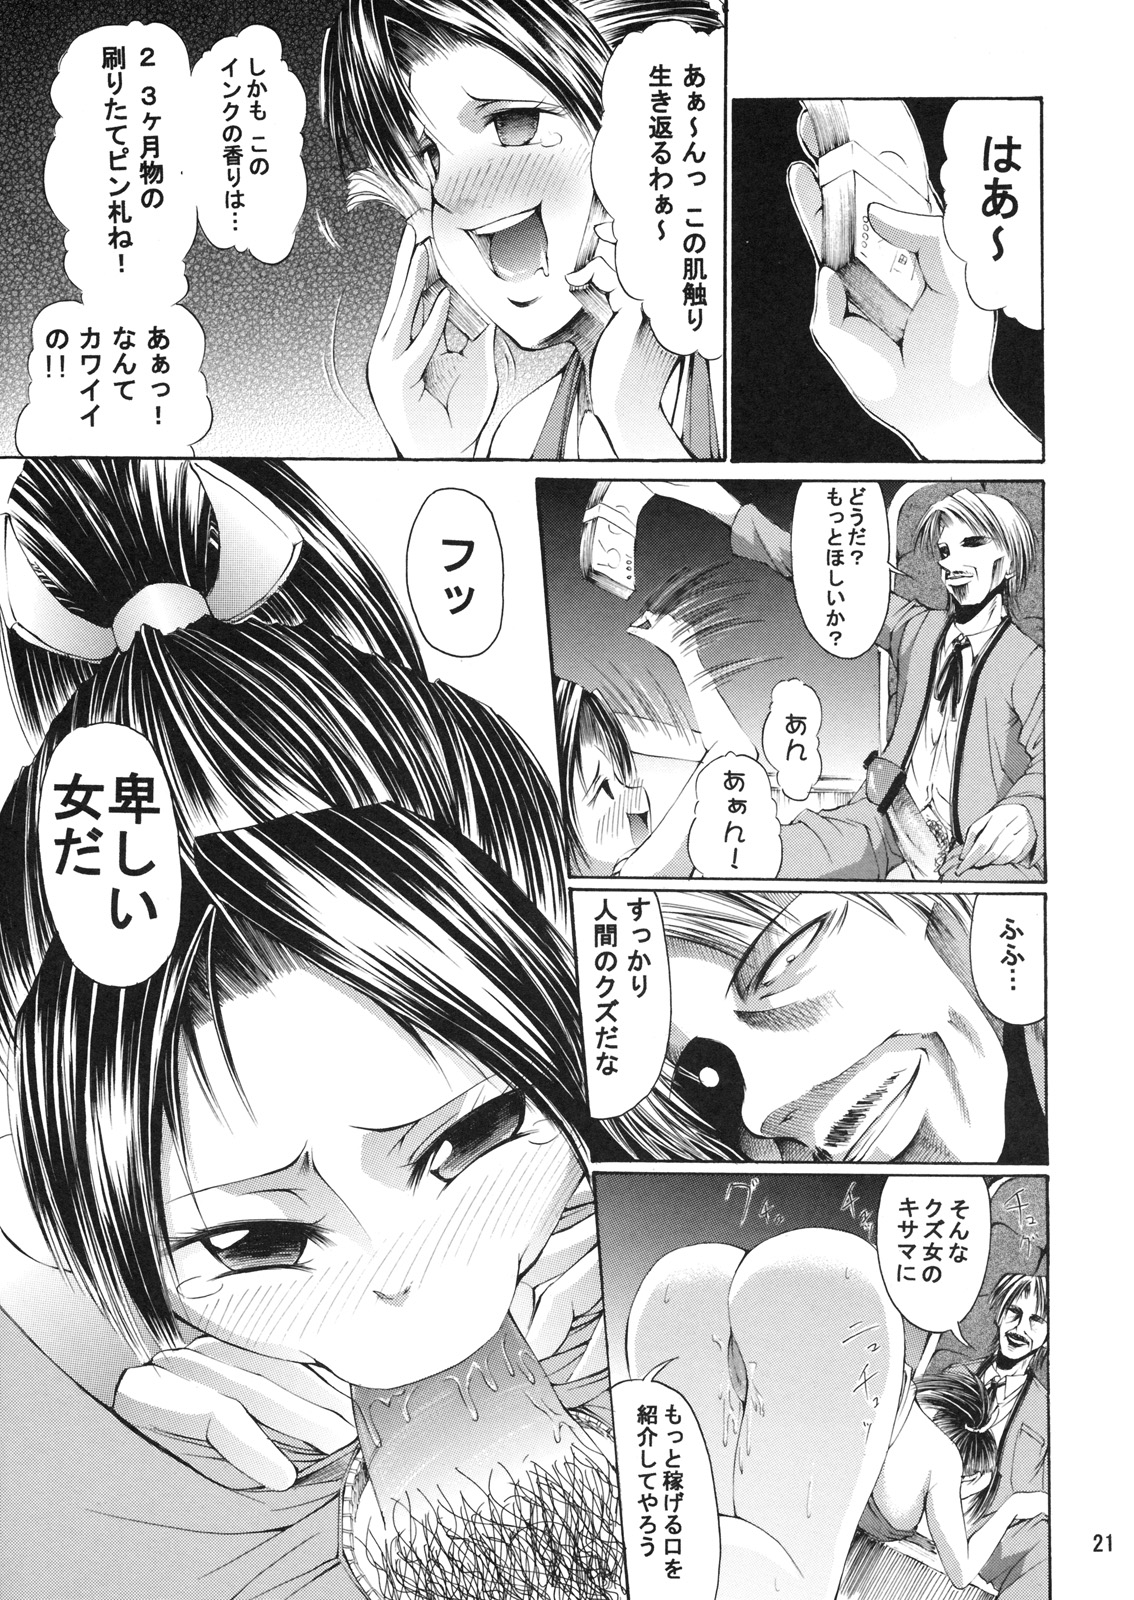 [3g (Junkie)] DOF Mai (King of Fighters) page 20 full